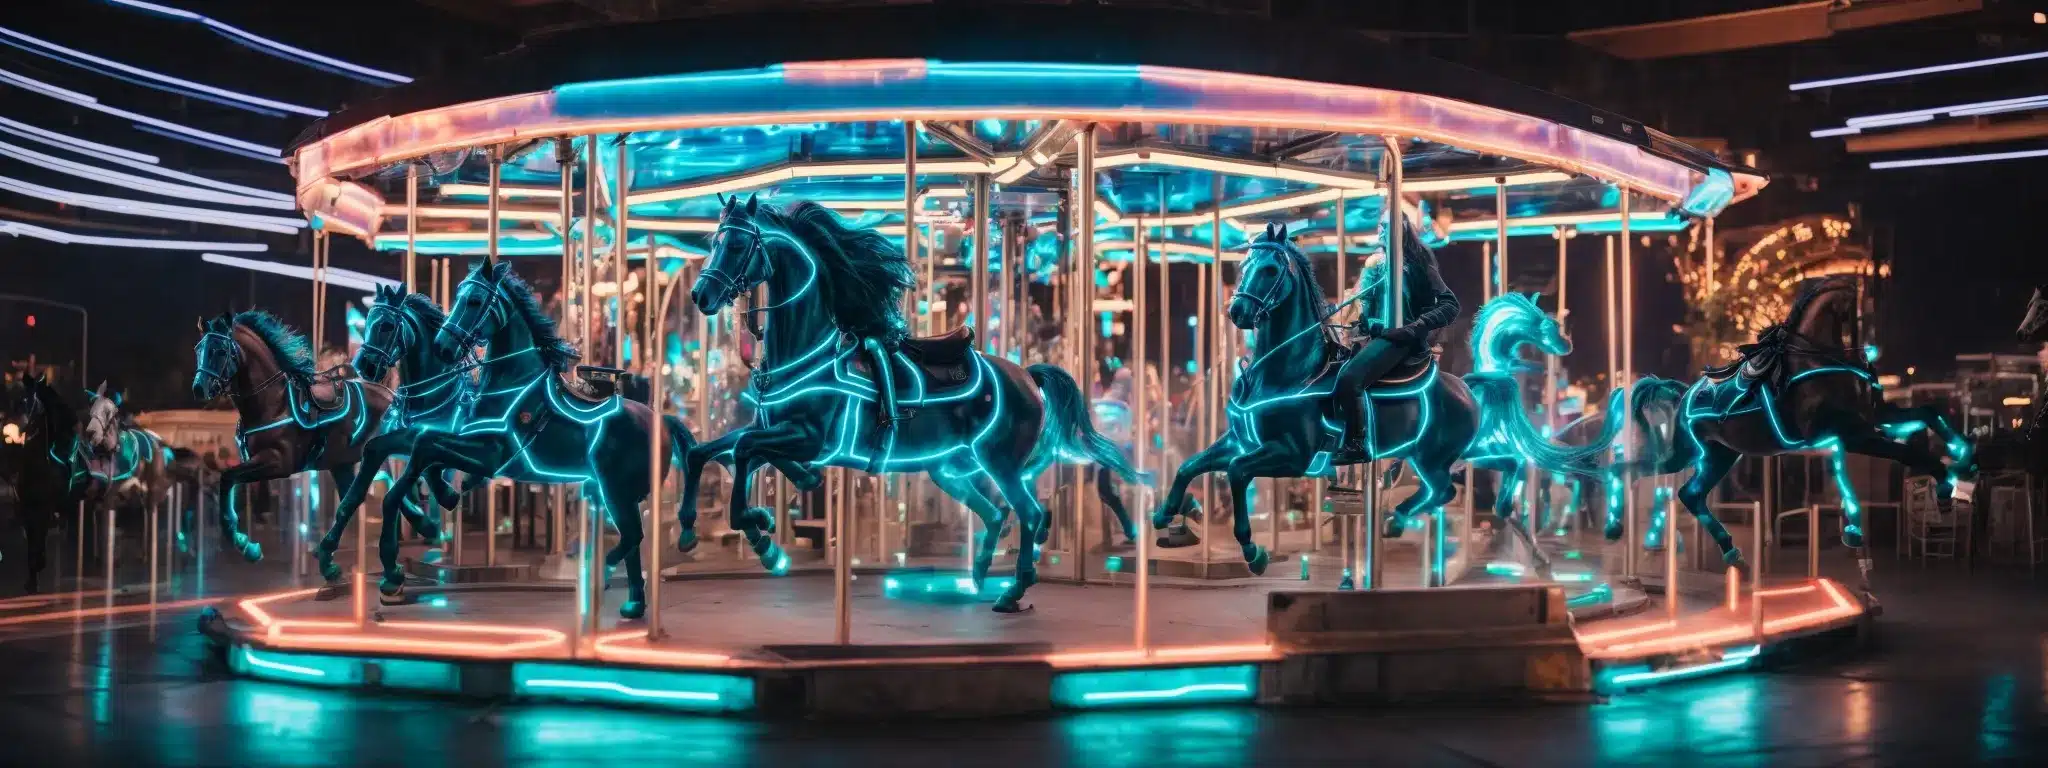 A Futuristic Carousel With Neon Lights And Holographic Horses, Symbolizing Dynamic Digital Innovation.